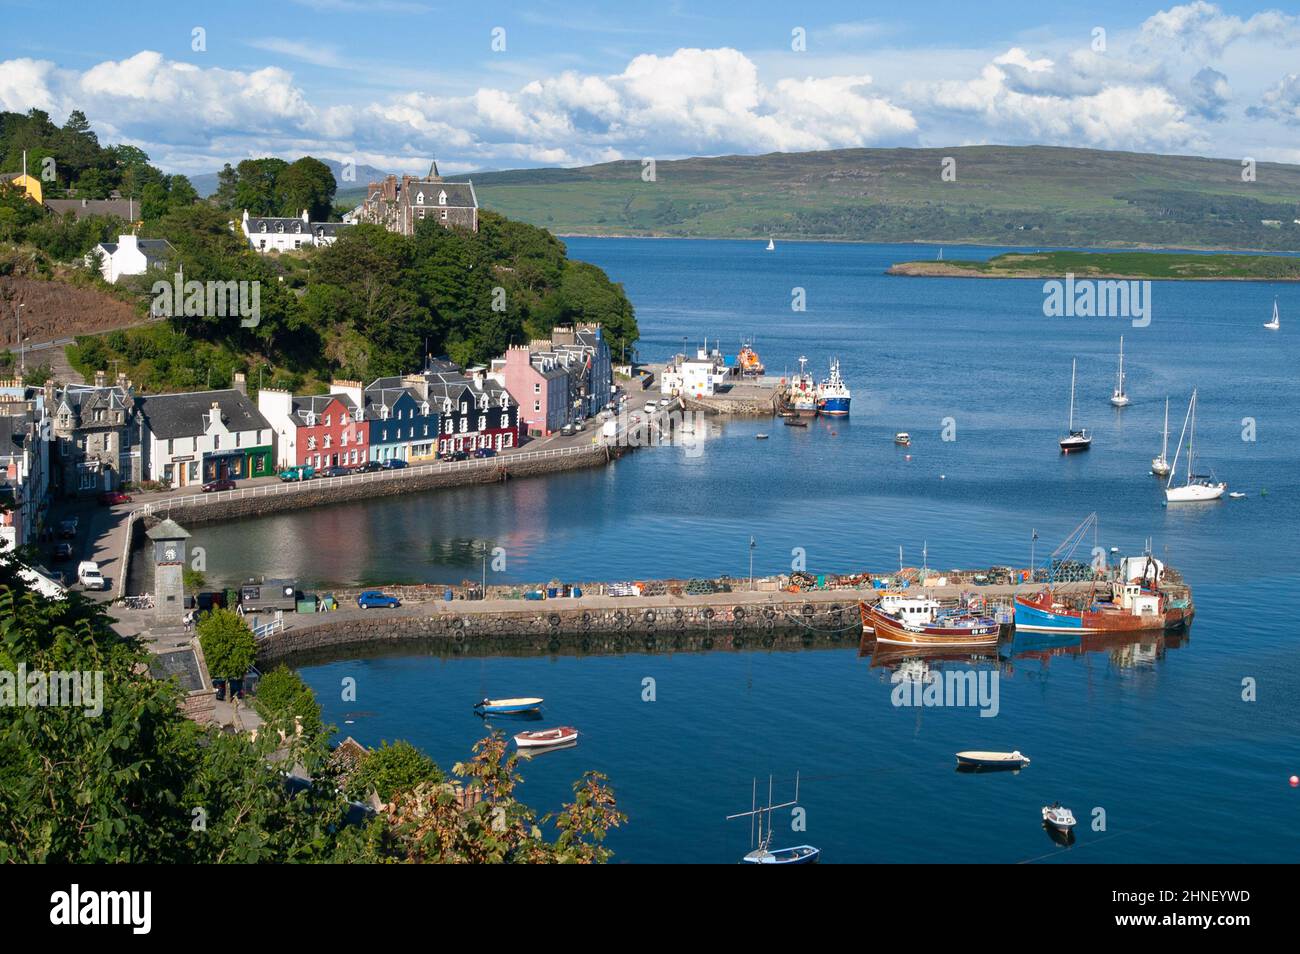 High aspect view of the fishing town and tourist destination of Tobermory on the Isle of Mull, Argyll, Inner Hebrides, Scotland, UK Stock Photo